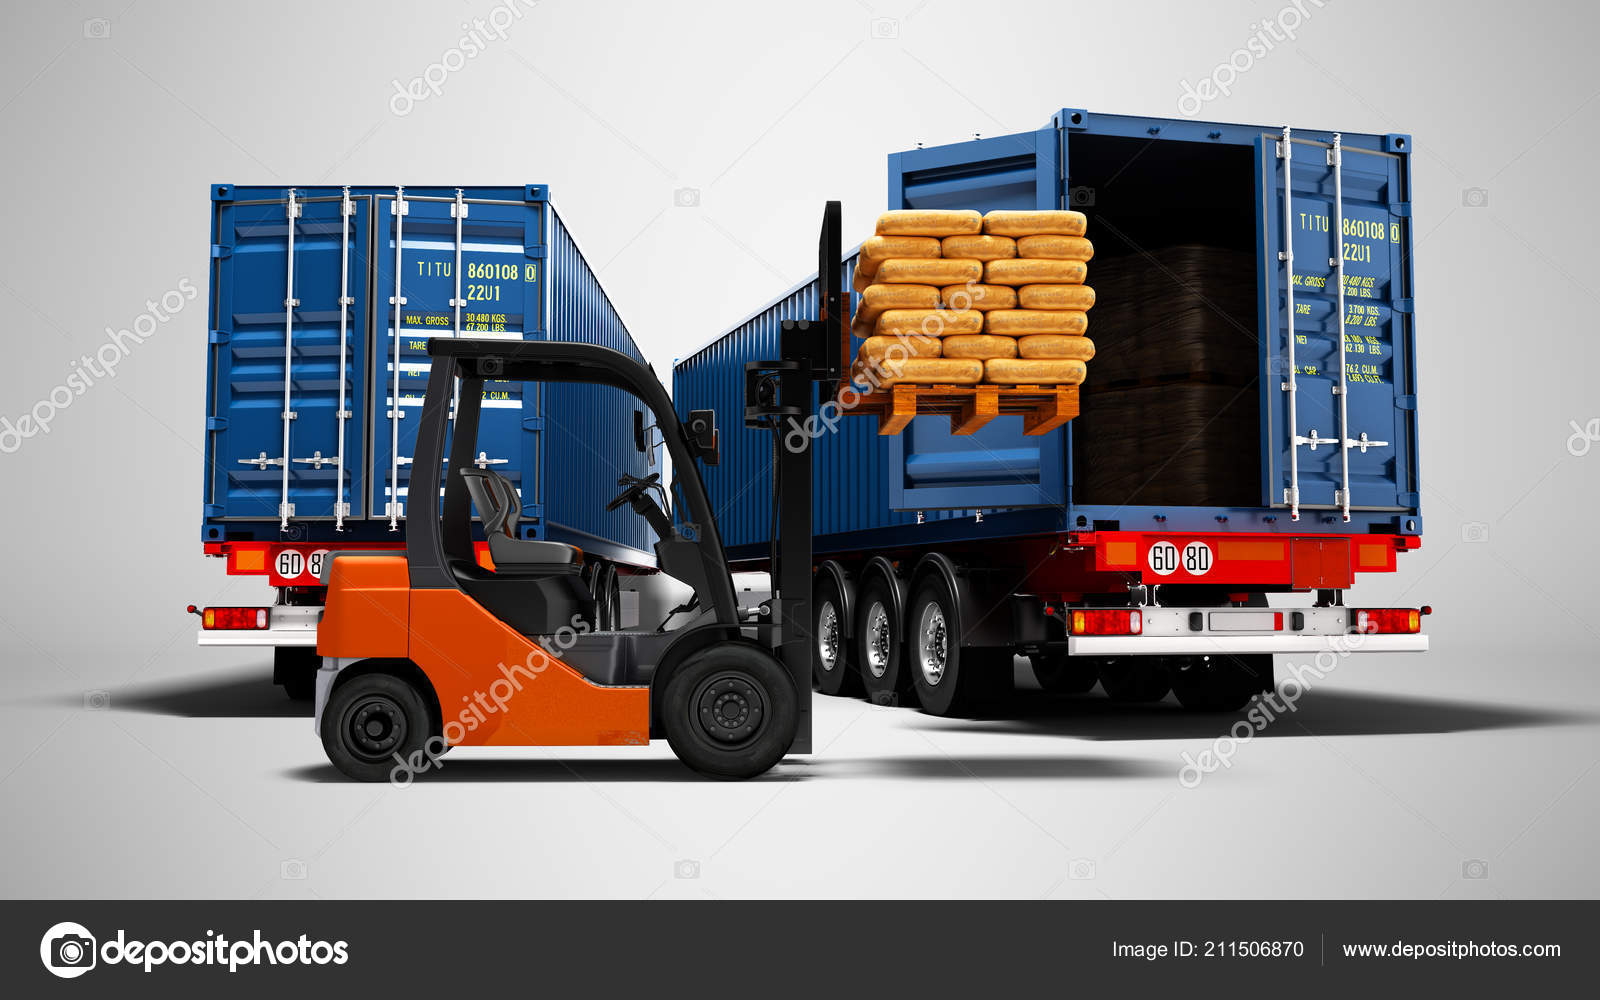 Freight Package Packaging Warehouse Logistics Concept Loading Unloading Cargo Two Stock Photo C Mar1art1 211506870